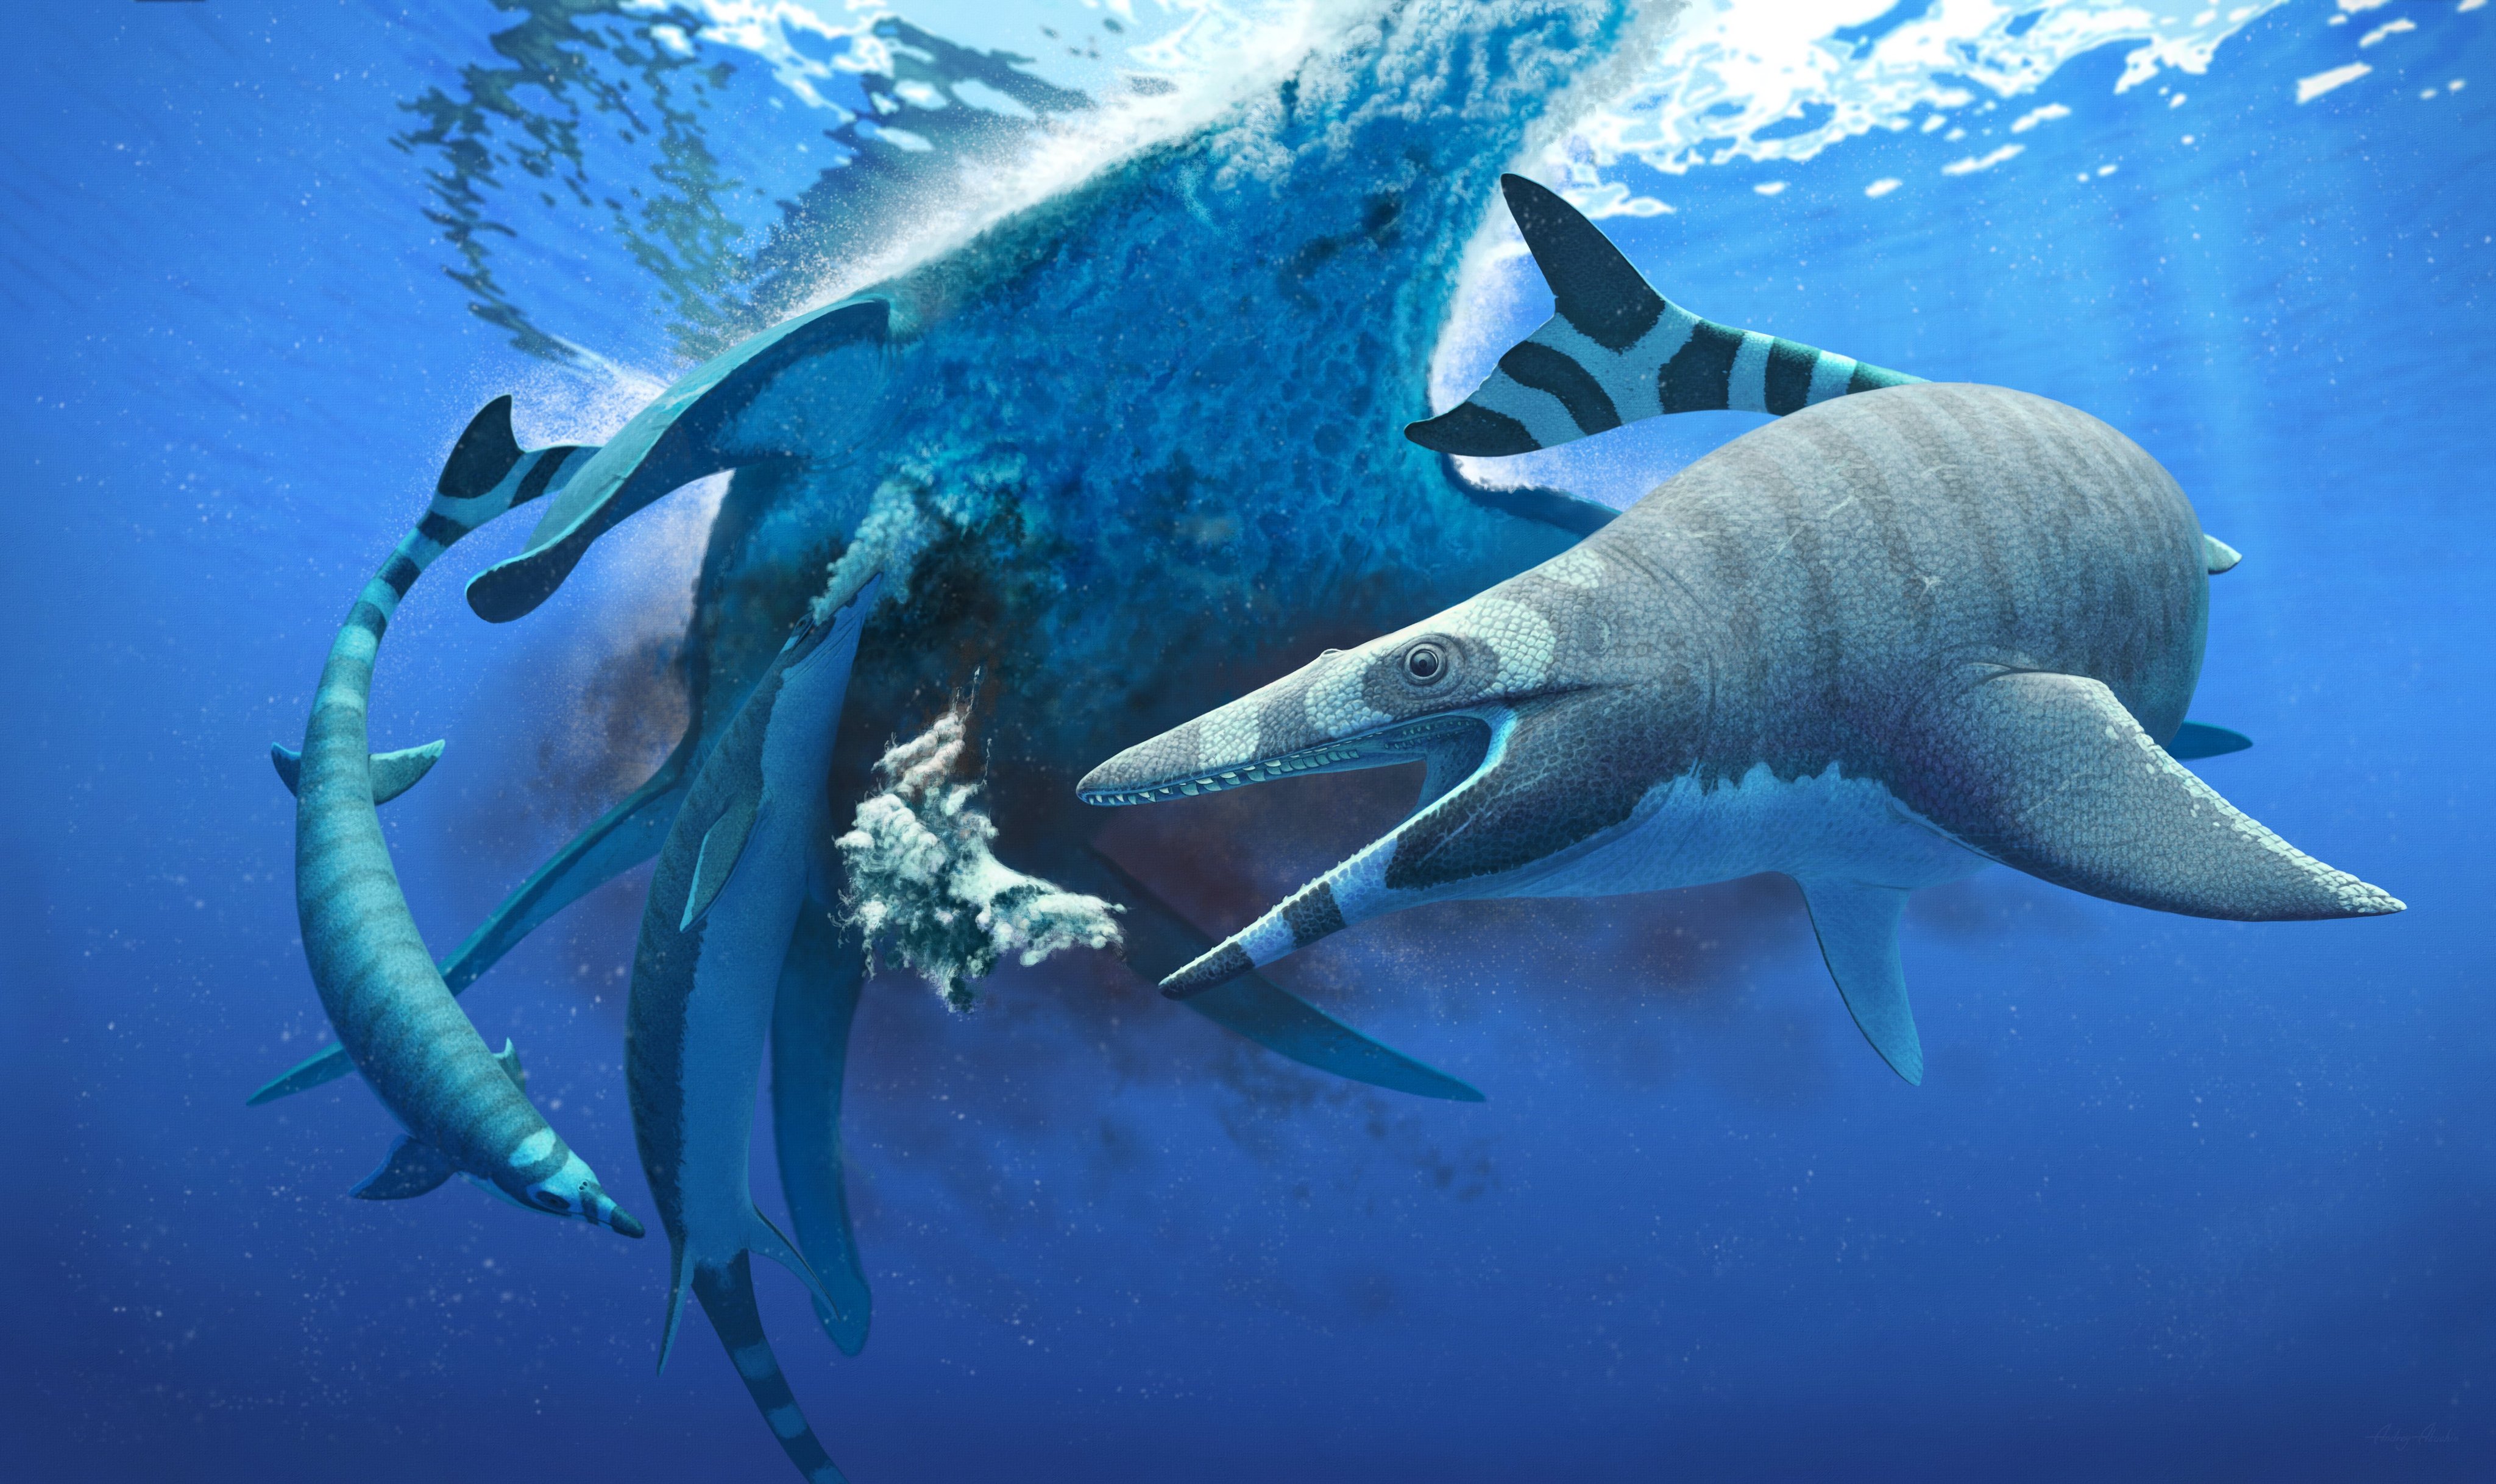 Andrey Atuchin On The New Mosasaur I Was Honored To Draw